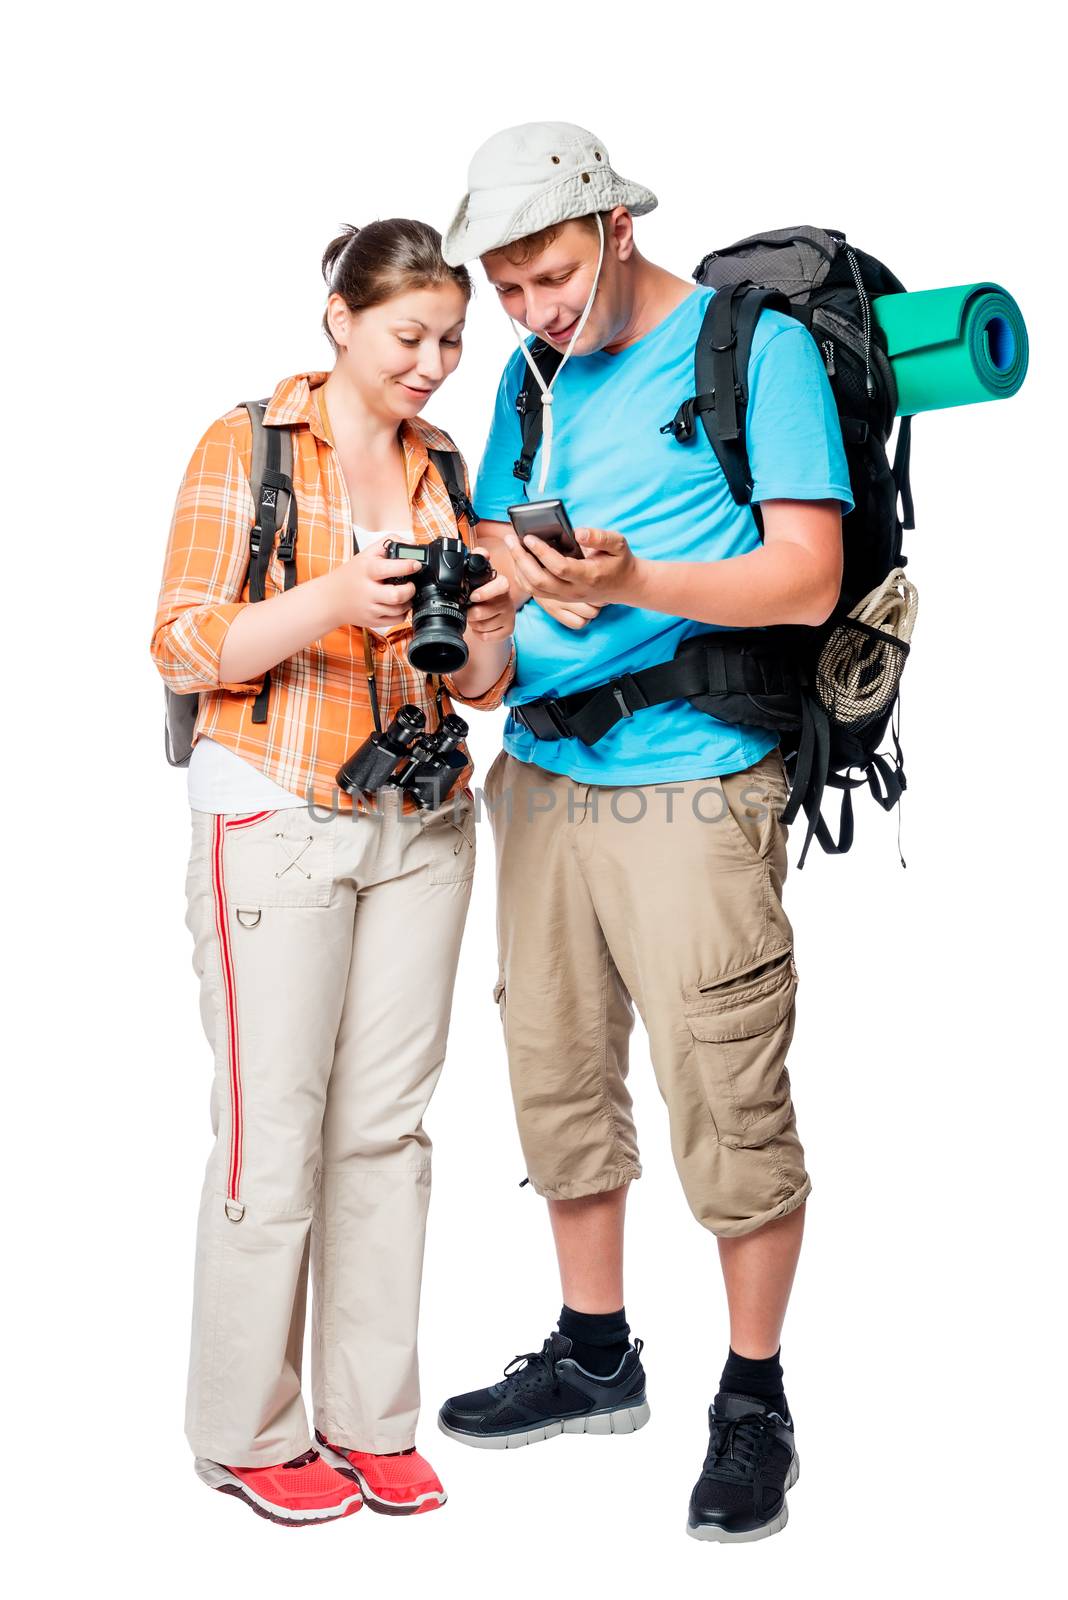 Active tourists with backpacks view photos on camera on white background